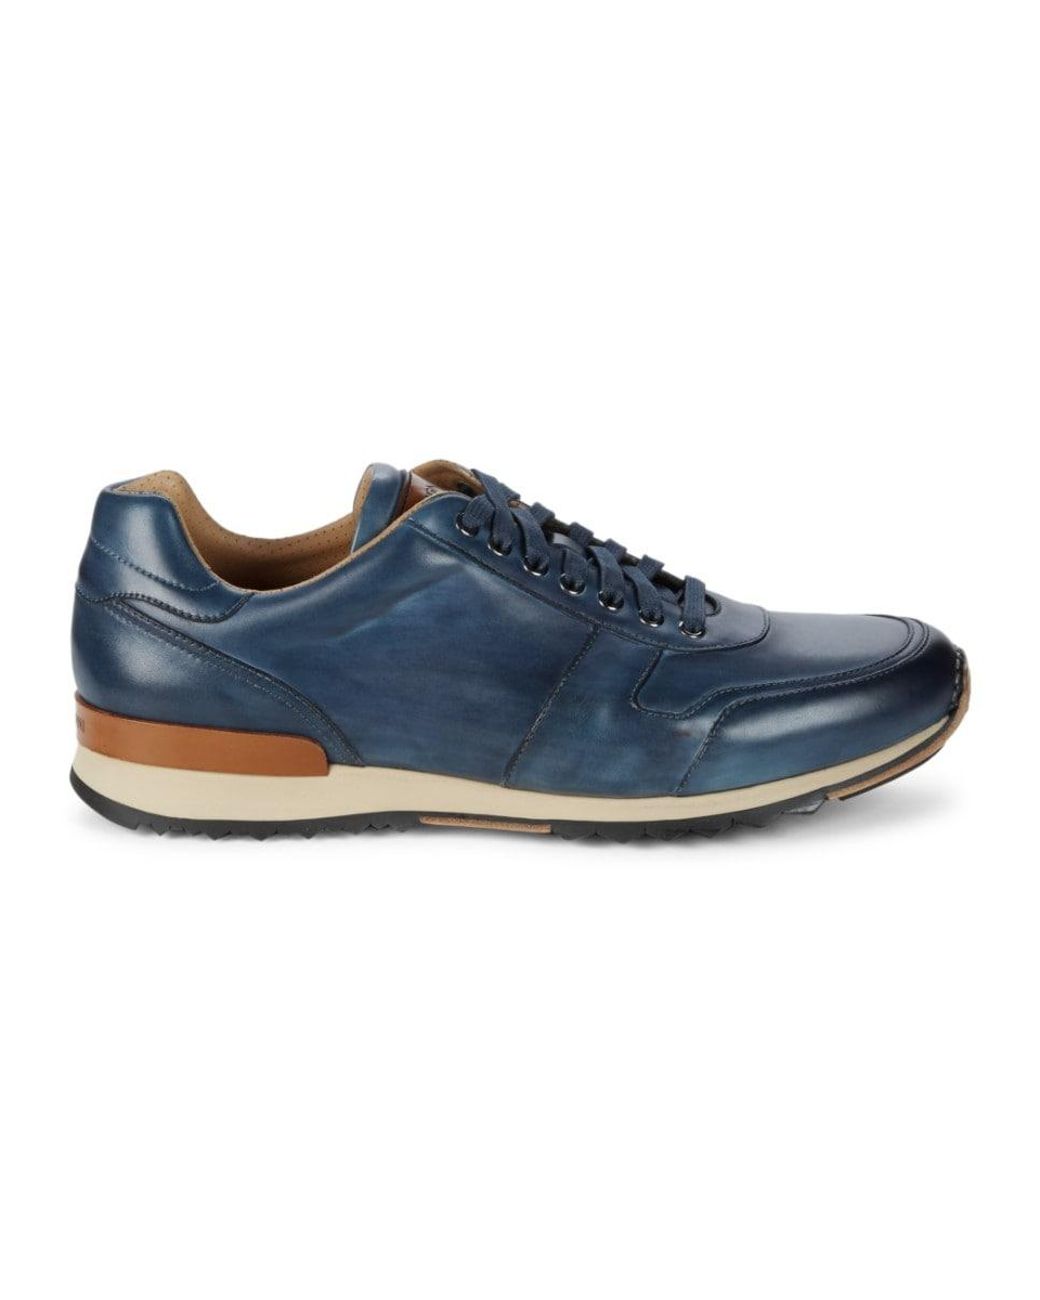 Magnanni Men's Camarena Leather Sneakers - Azul - Size 7.5 in Blue | Lyst